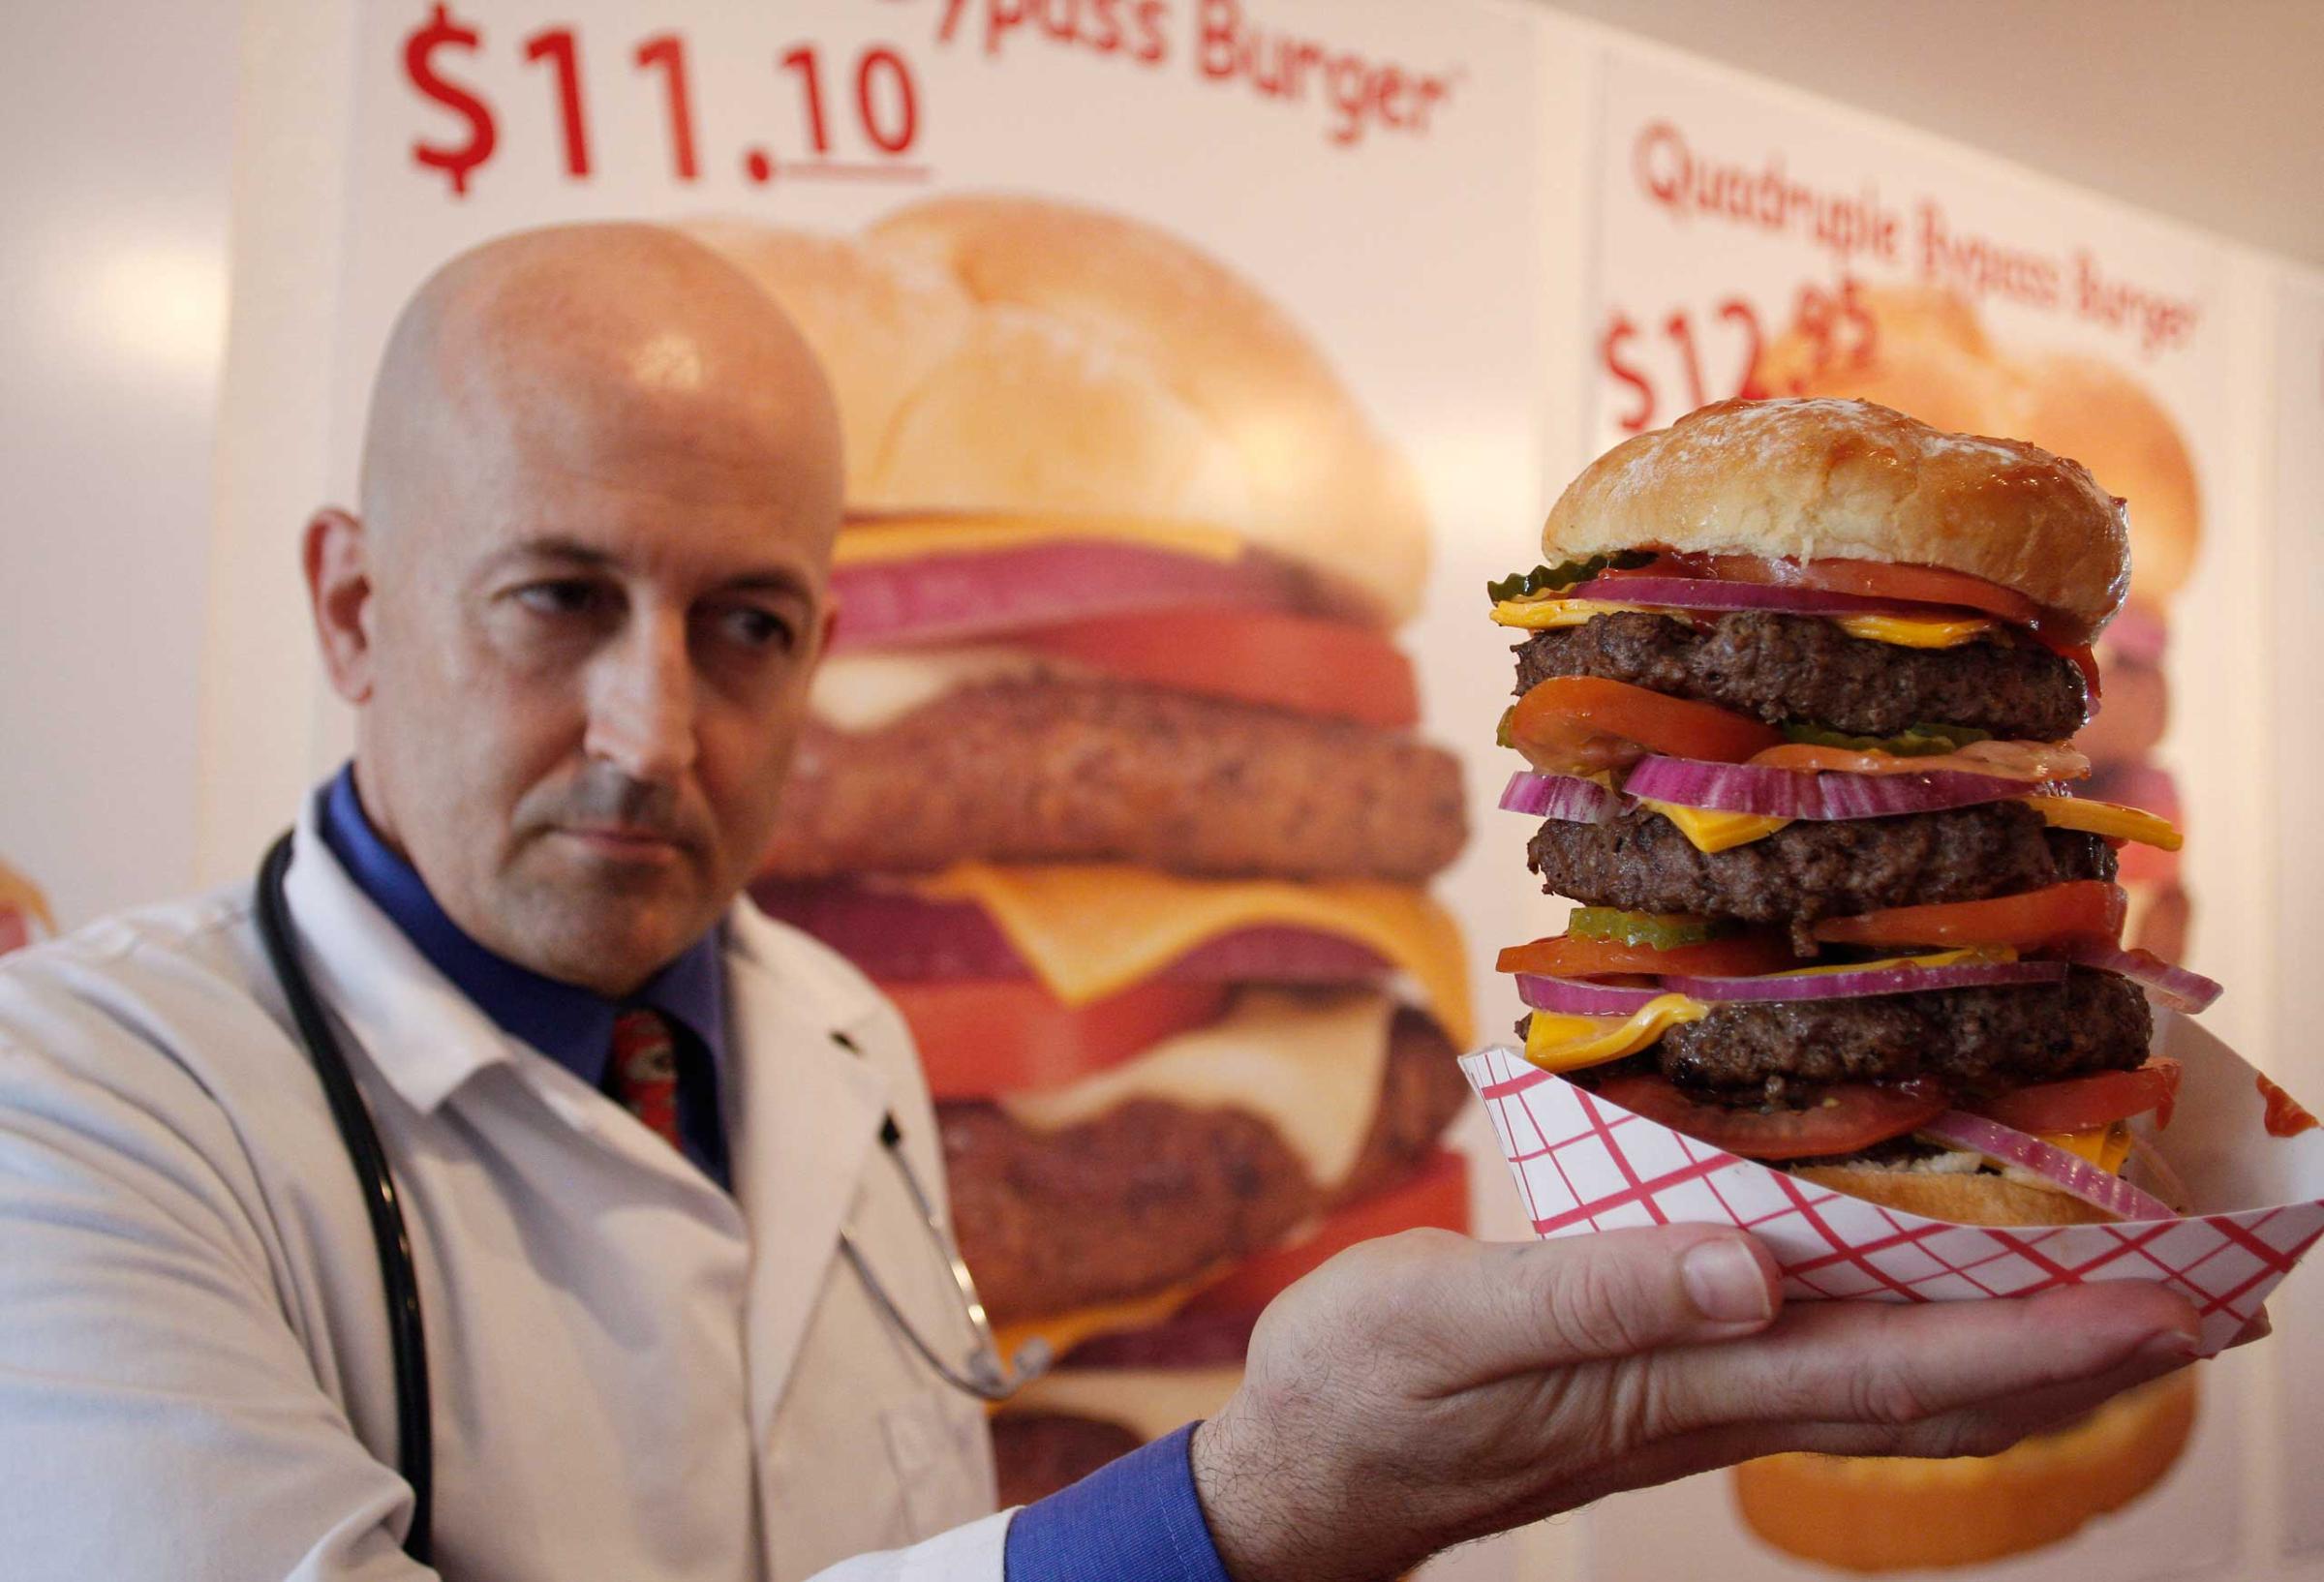 Heart Attack Grill owner Jon poses with a quadruple bypass cheese burger in Chandler, Arizona